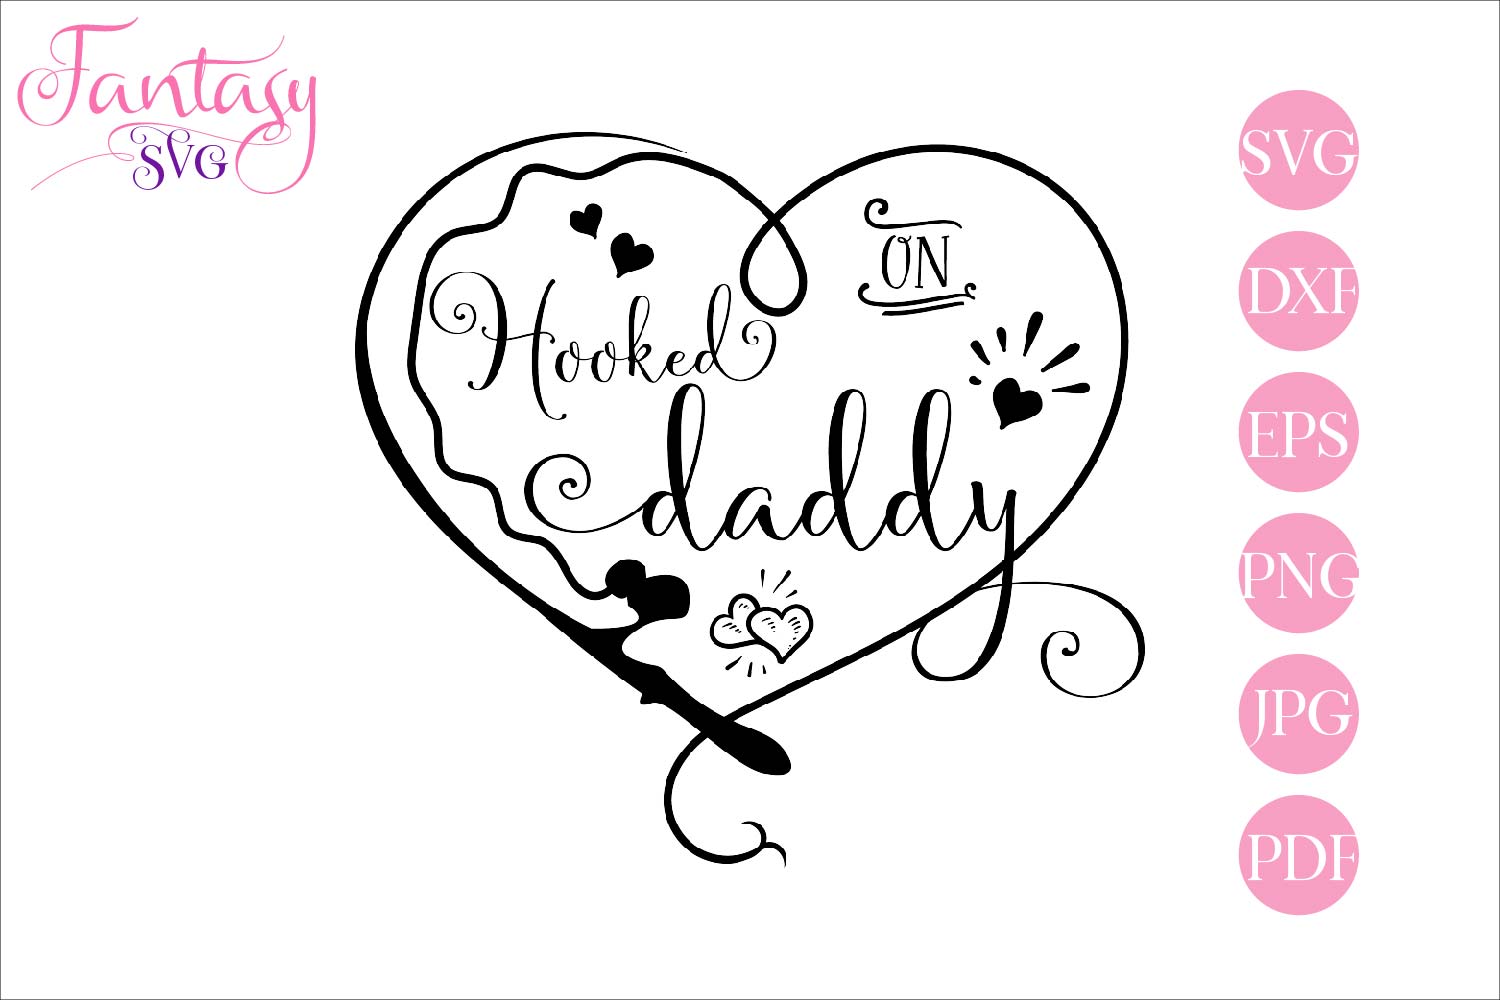 Download Hooked on daddy - svg cut file